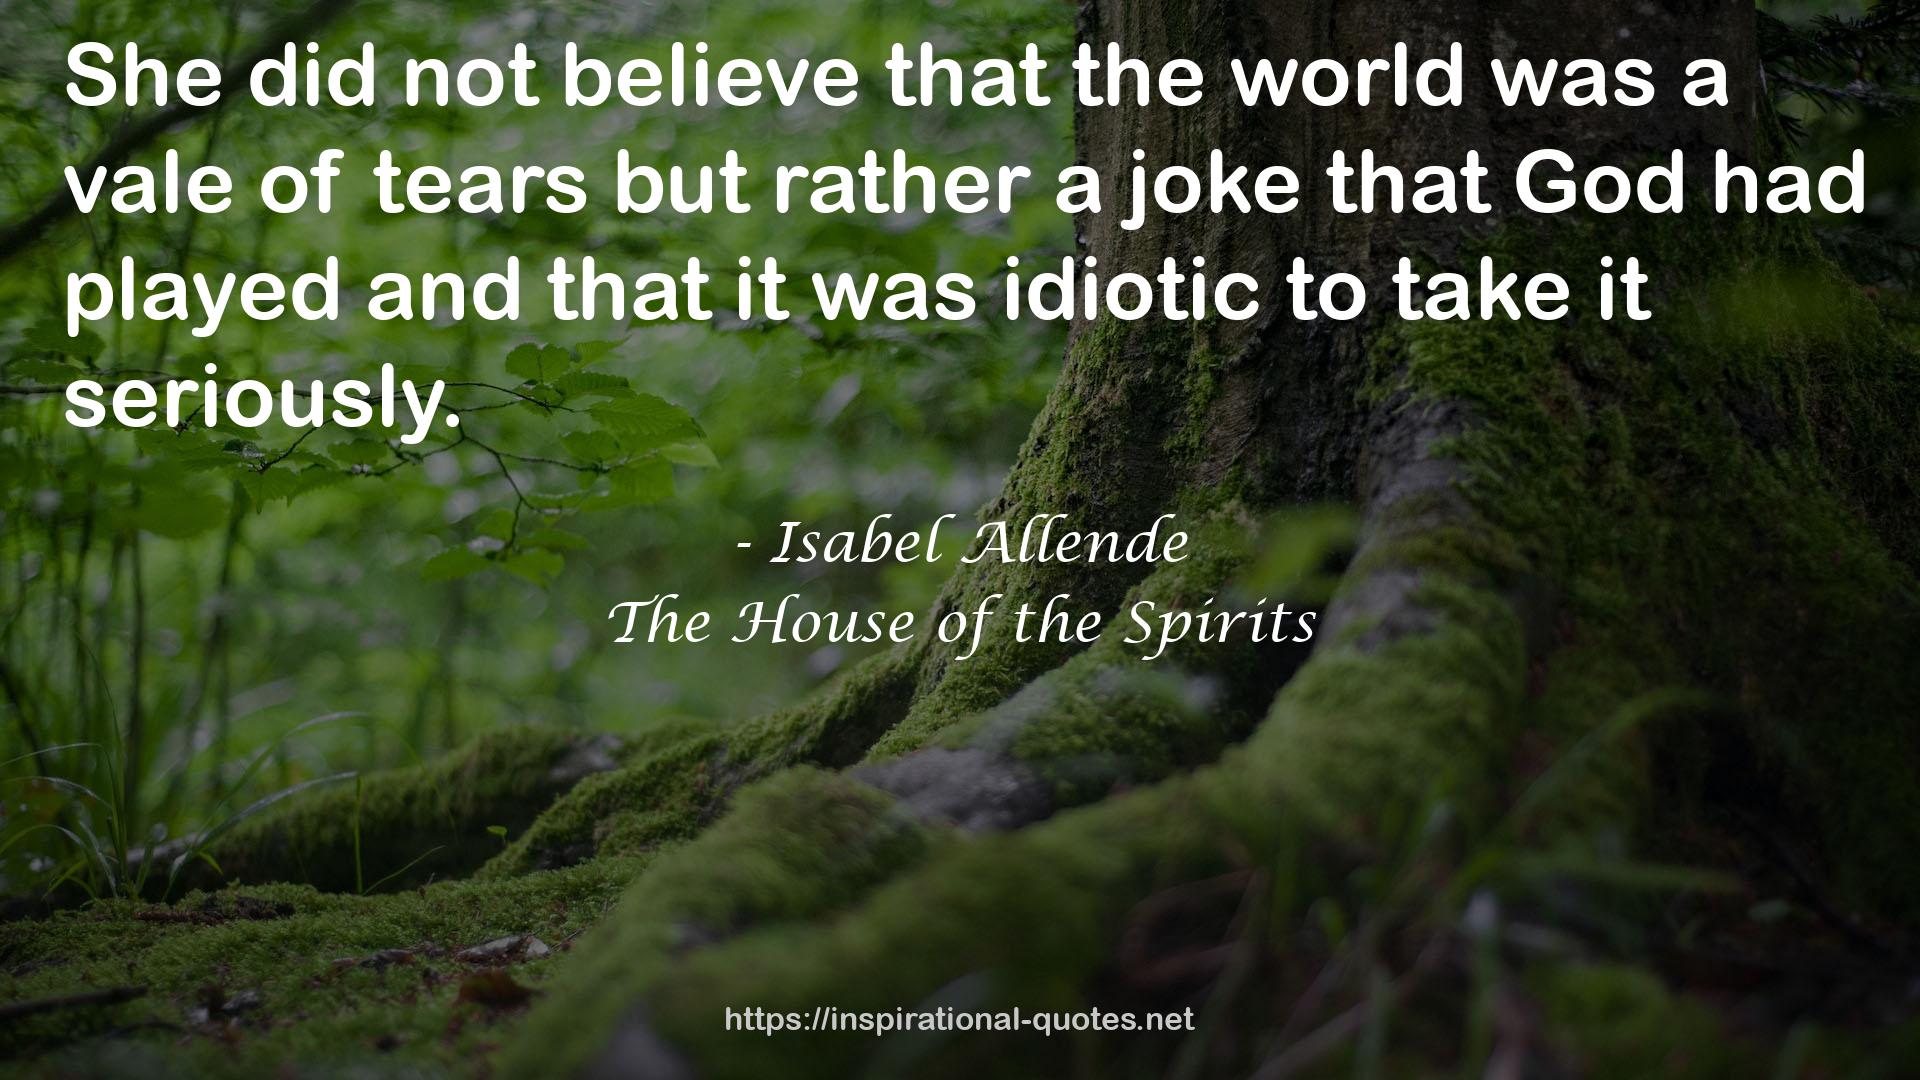 Isabel Allende QUOTES